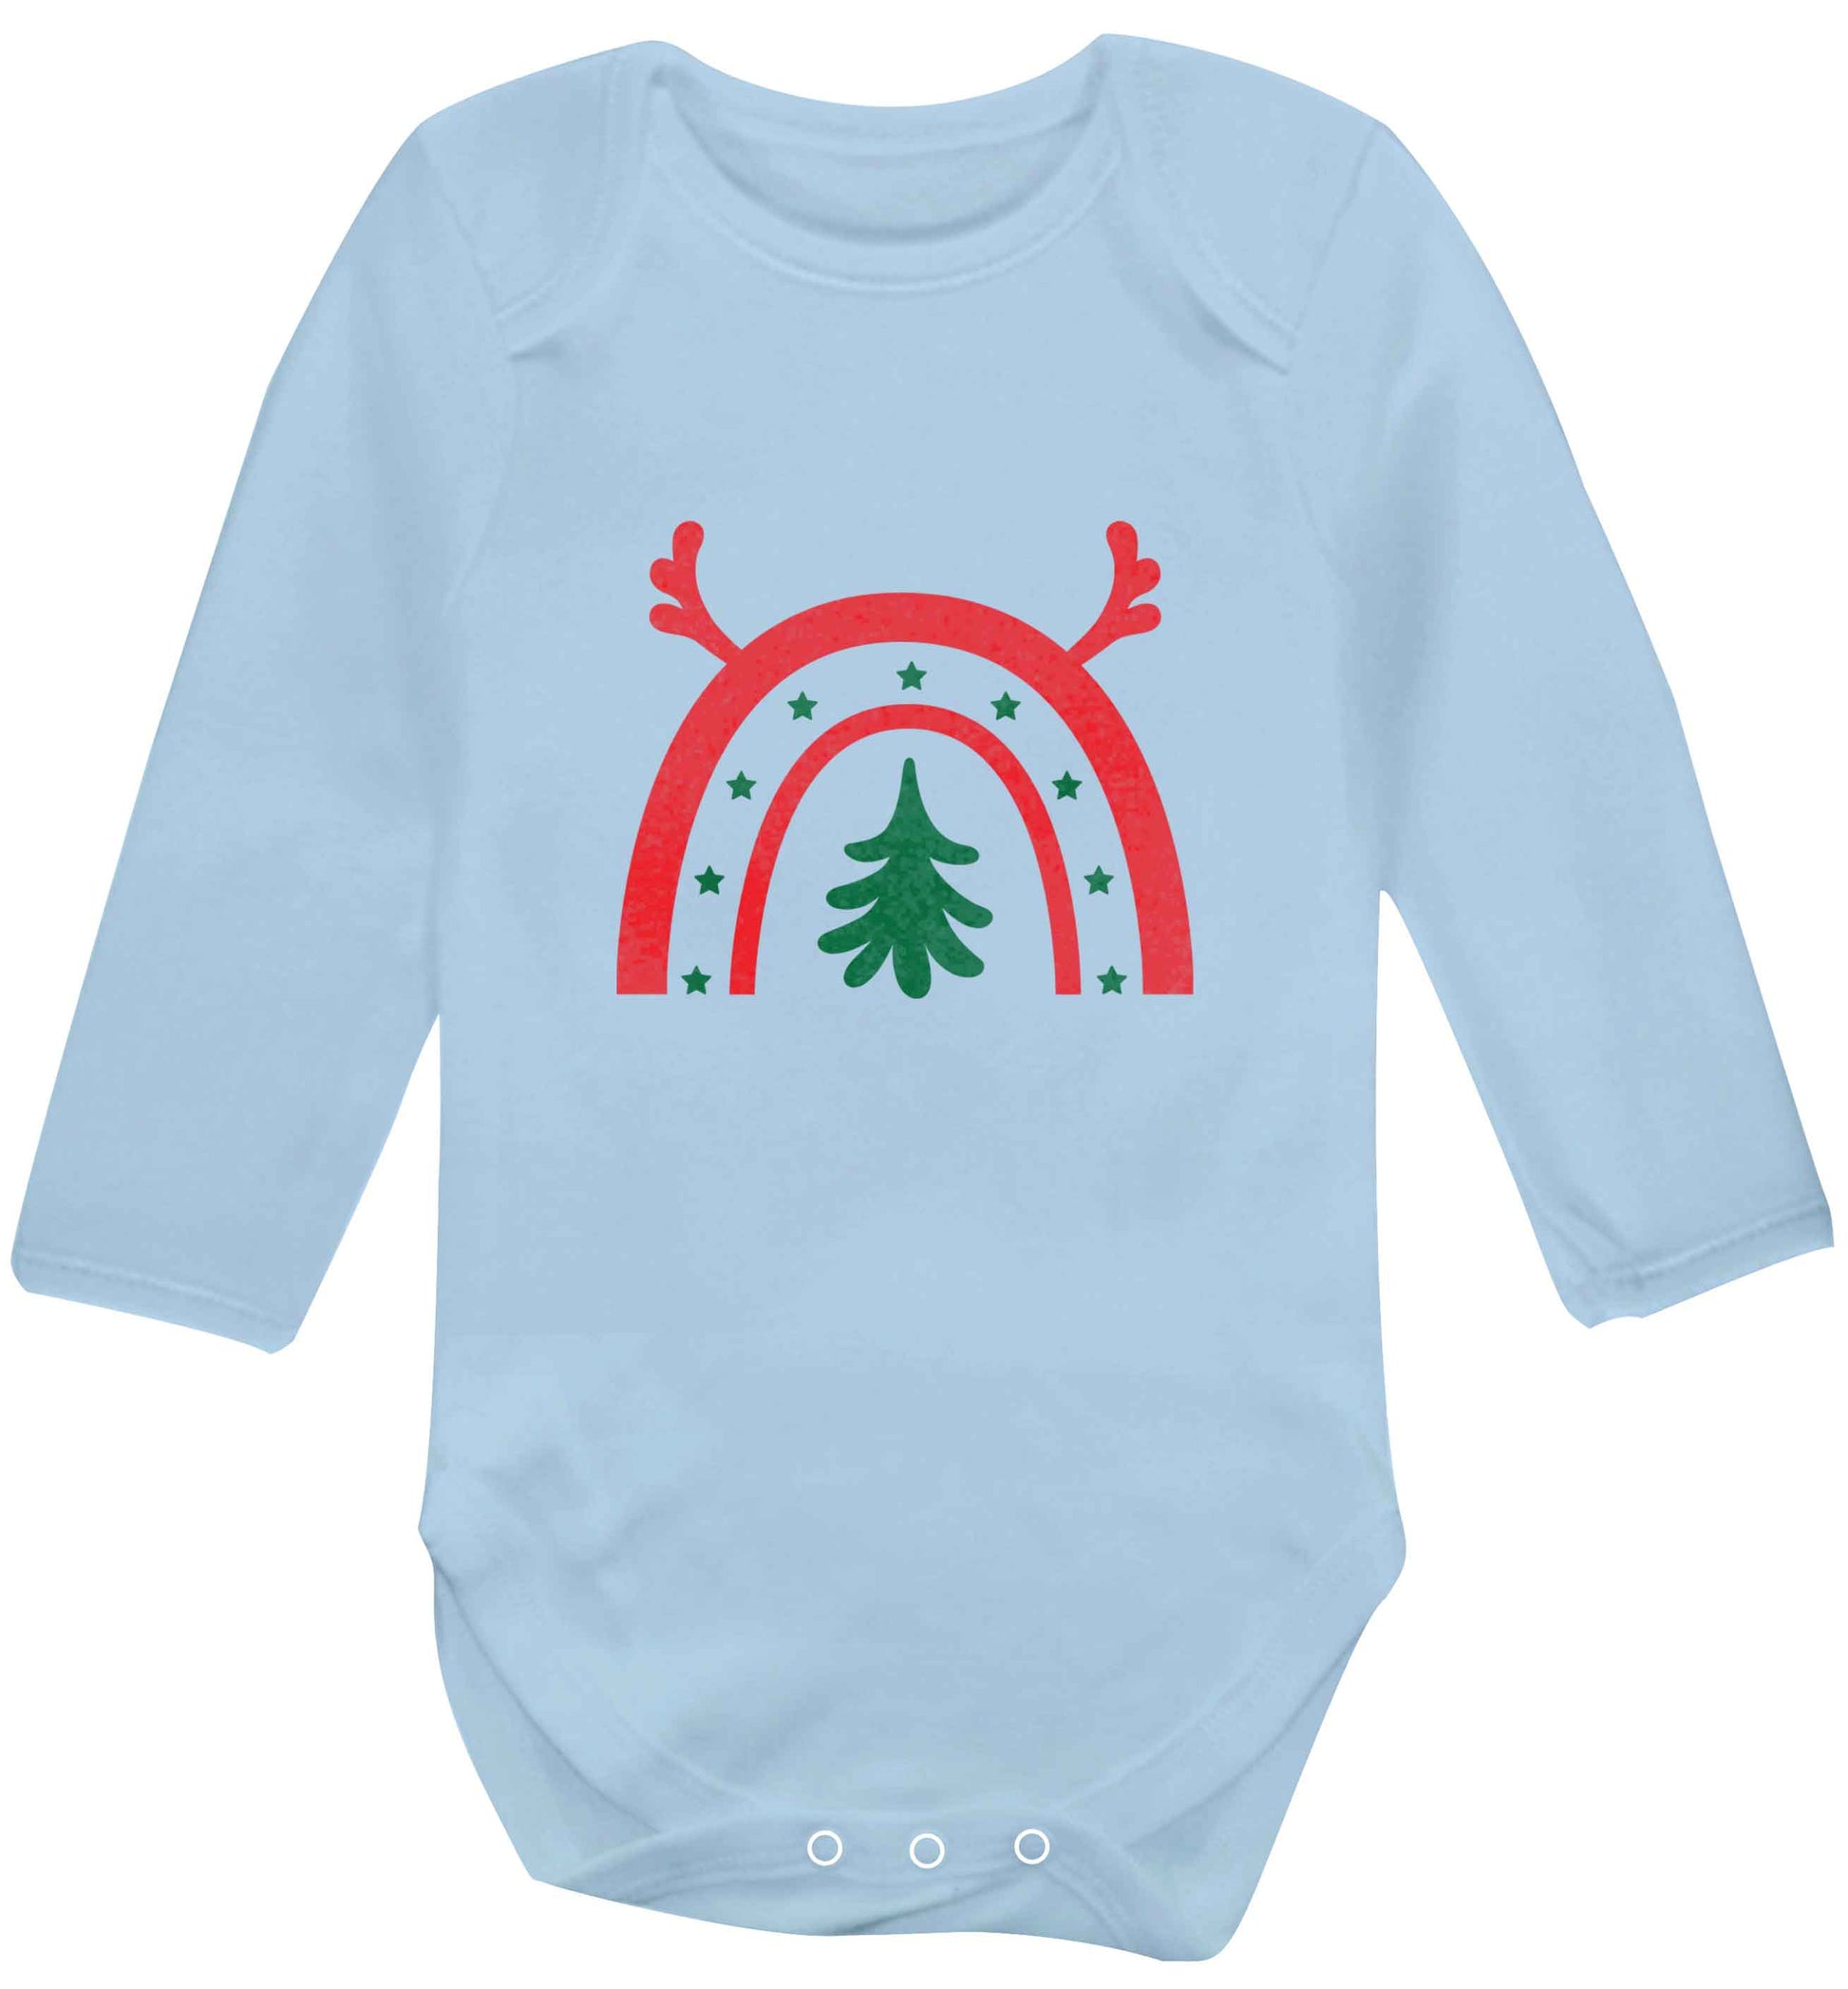 Christmas rainbow baby vest long sleeved pale blue 6-12 months